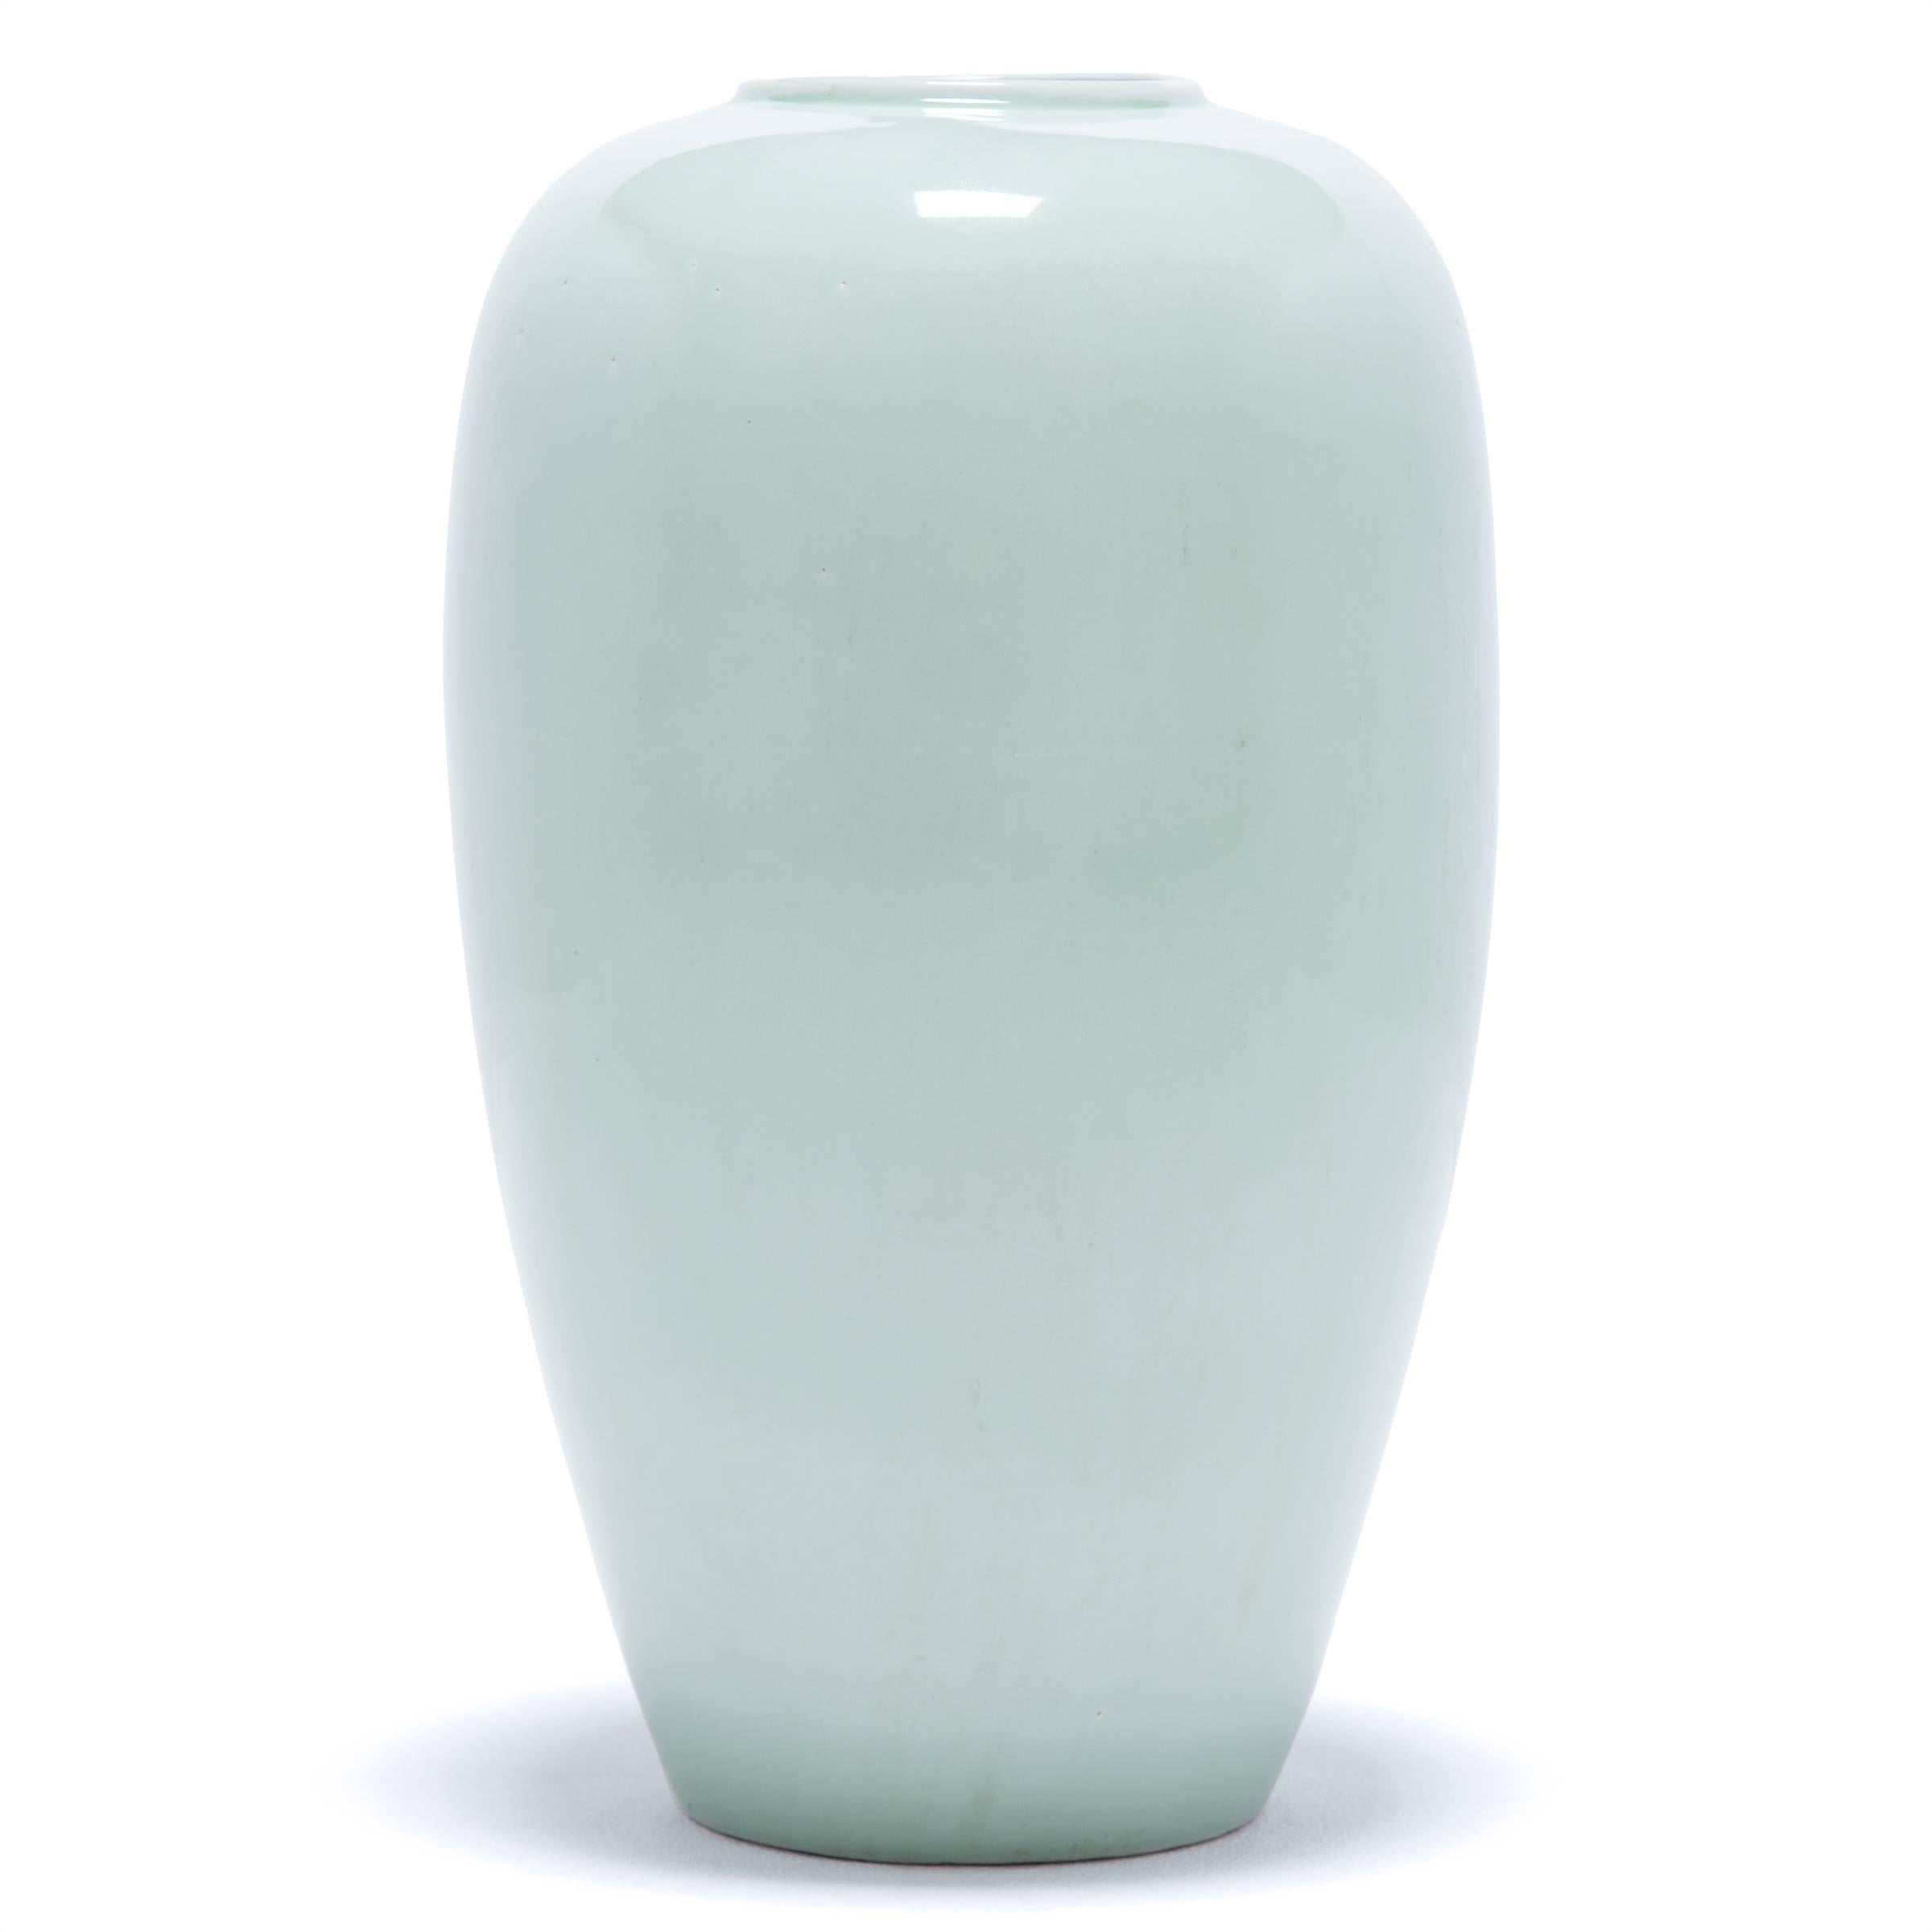 This sleek update on a traditional Chinese design displays an elegant, simplified Silhouette. Handcrafted in Zhejiang province, this contemporary vase showcases its Minimalist form with a gentle celadon glaze the color of creamy jade.

 